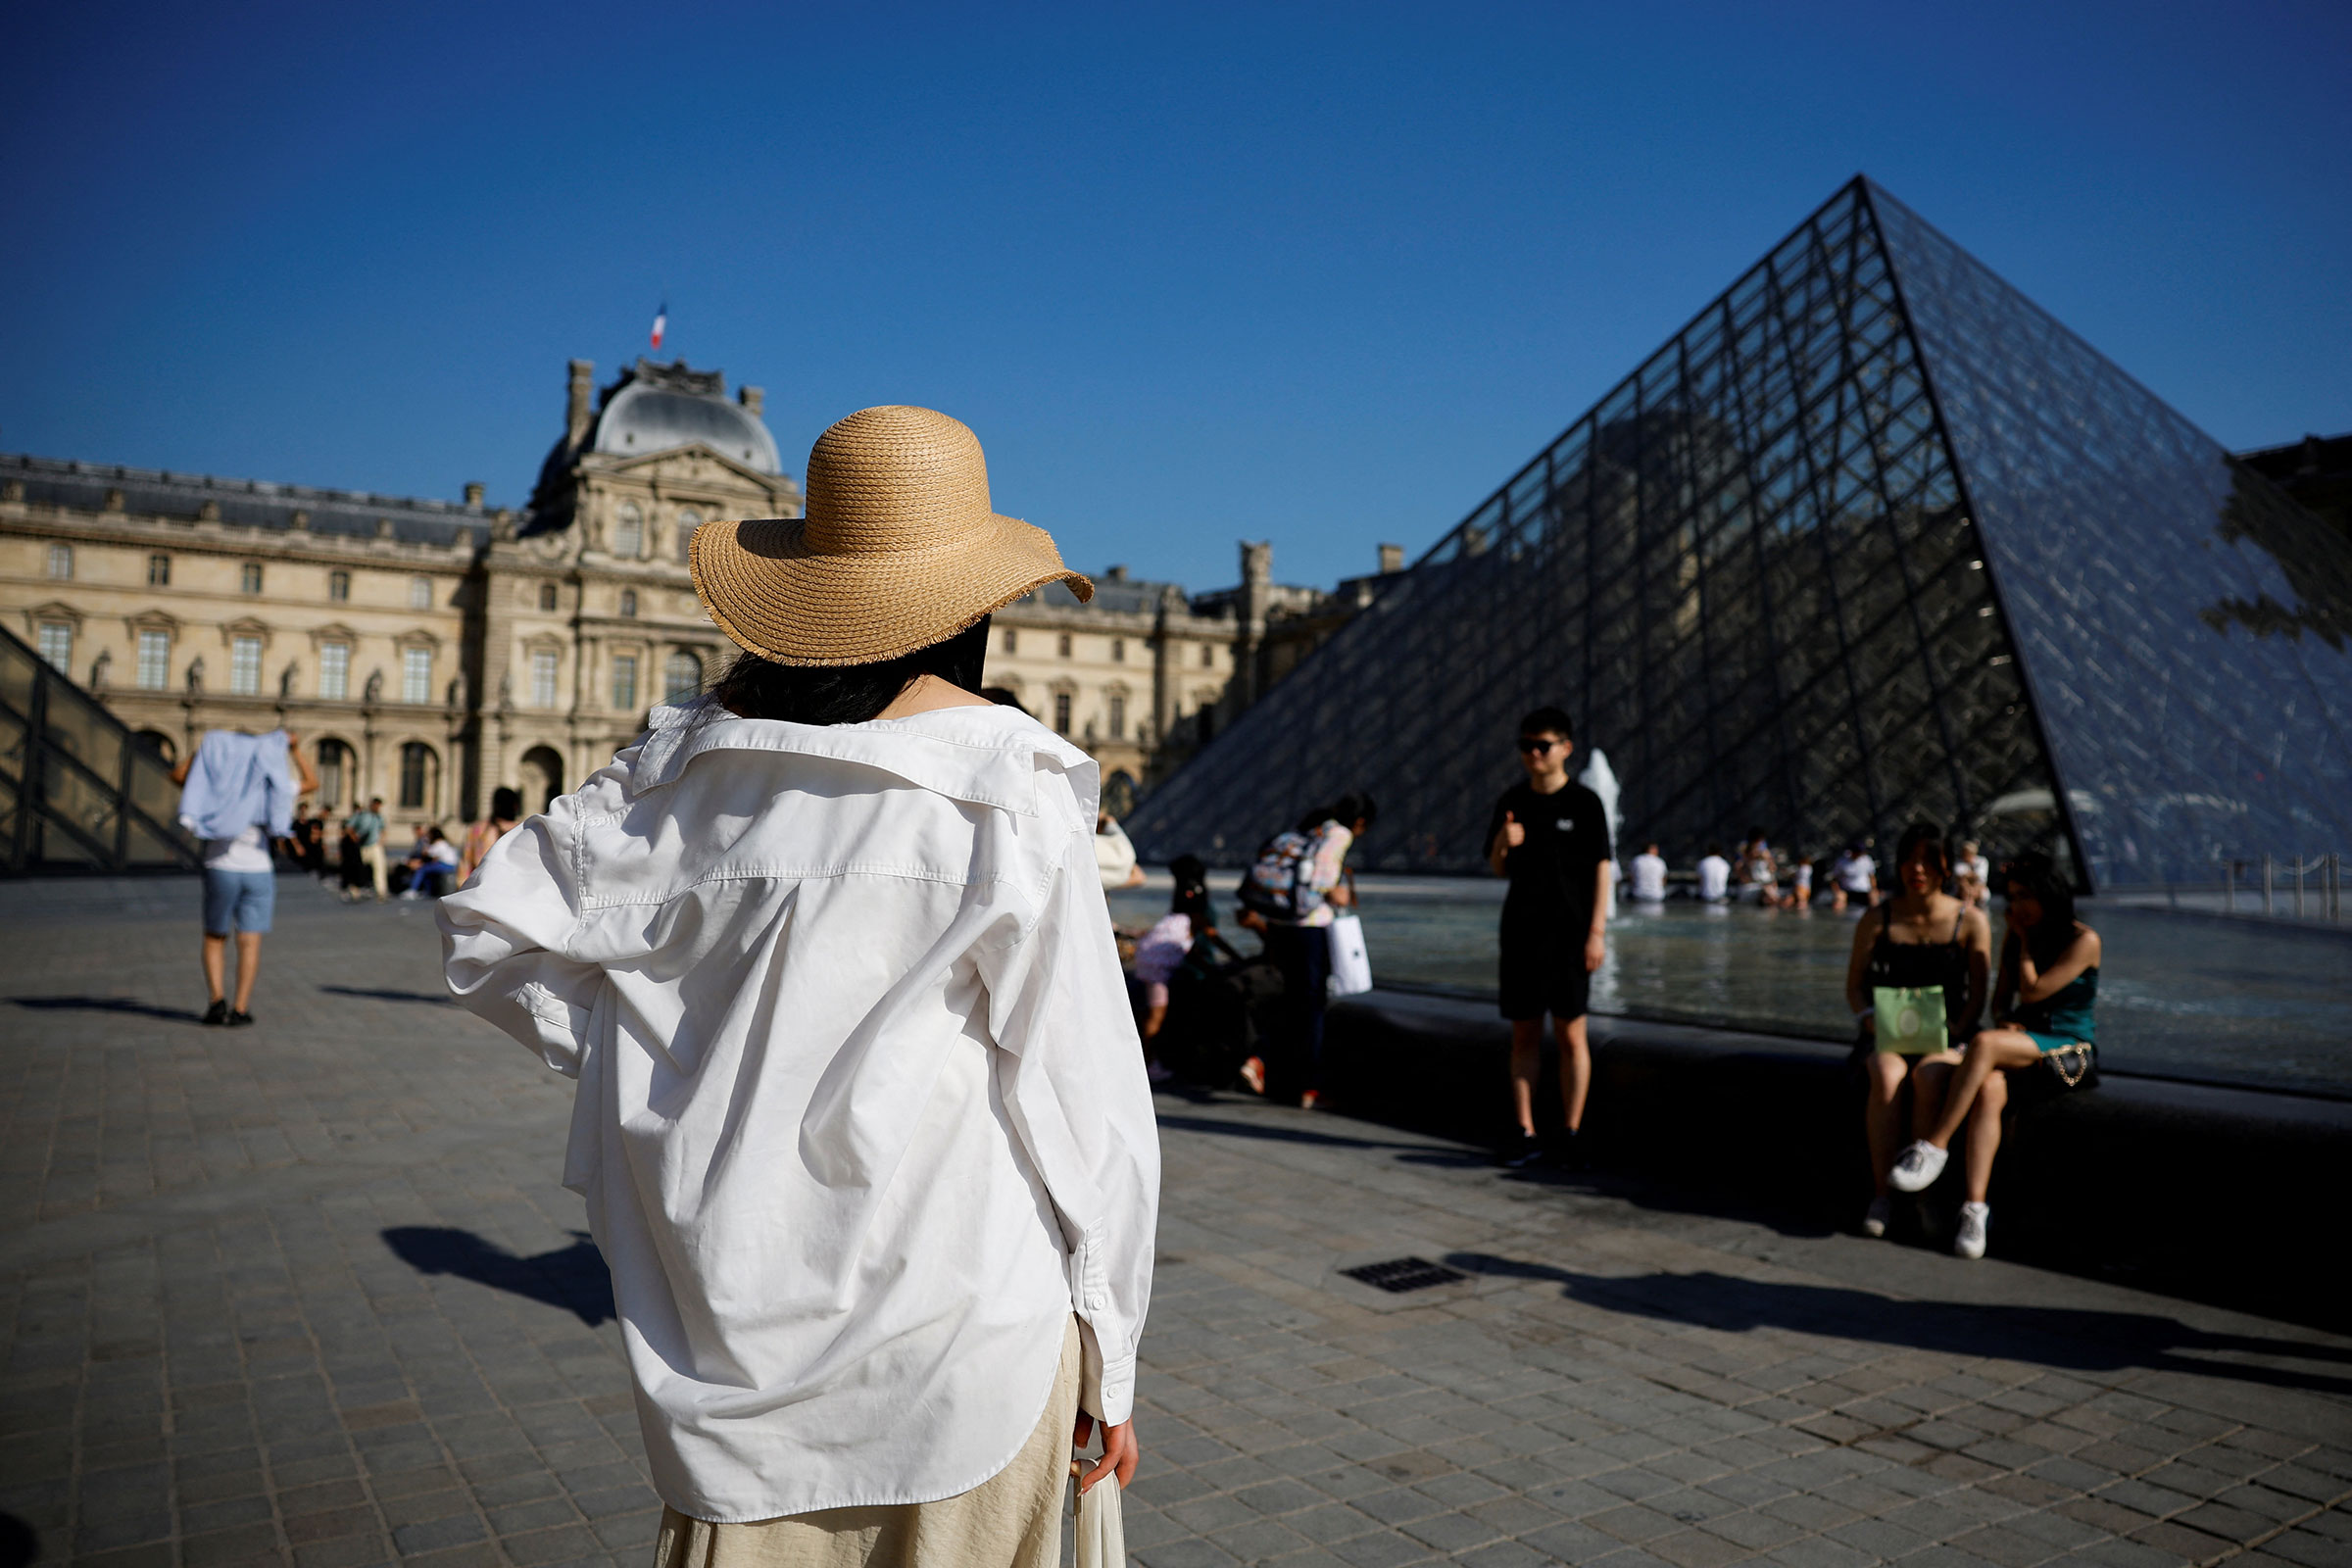 A tourist stands in front of the glass pyramid of the Louvre museum in Paris, France, June 15, 2022. (Sarah Meyssonnier—Reuters)